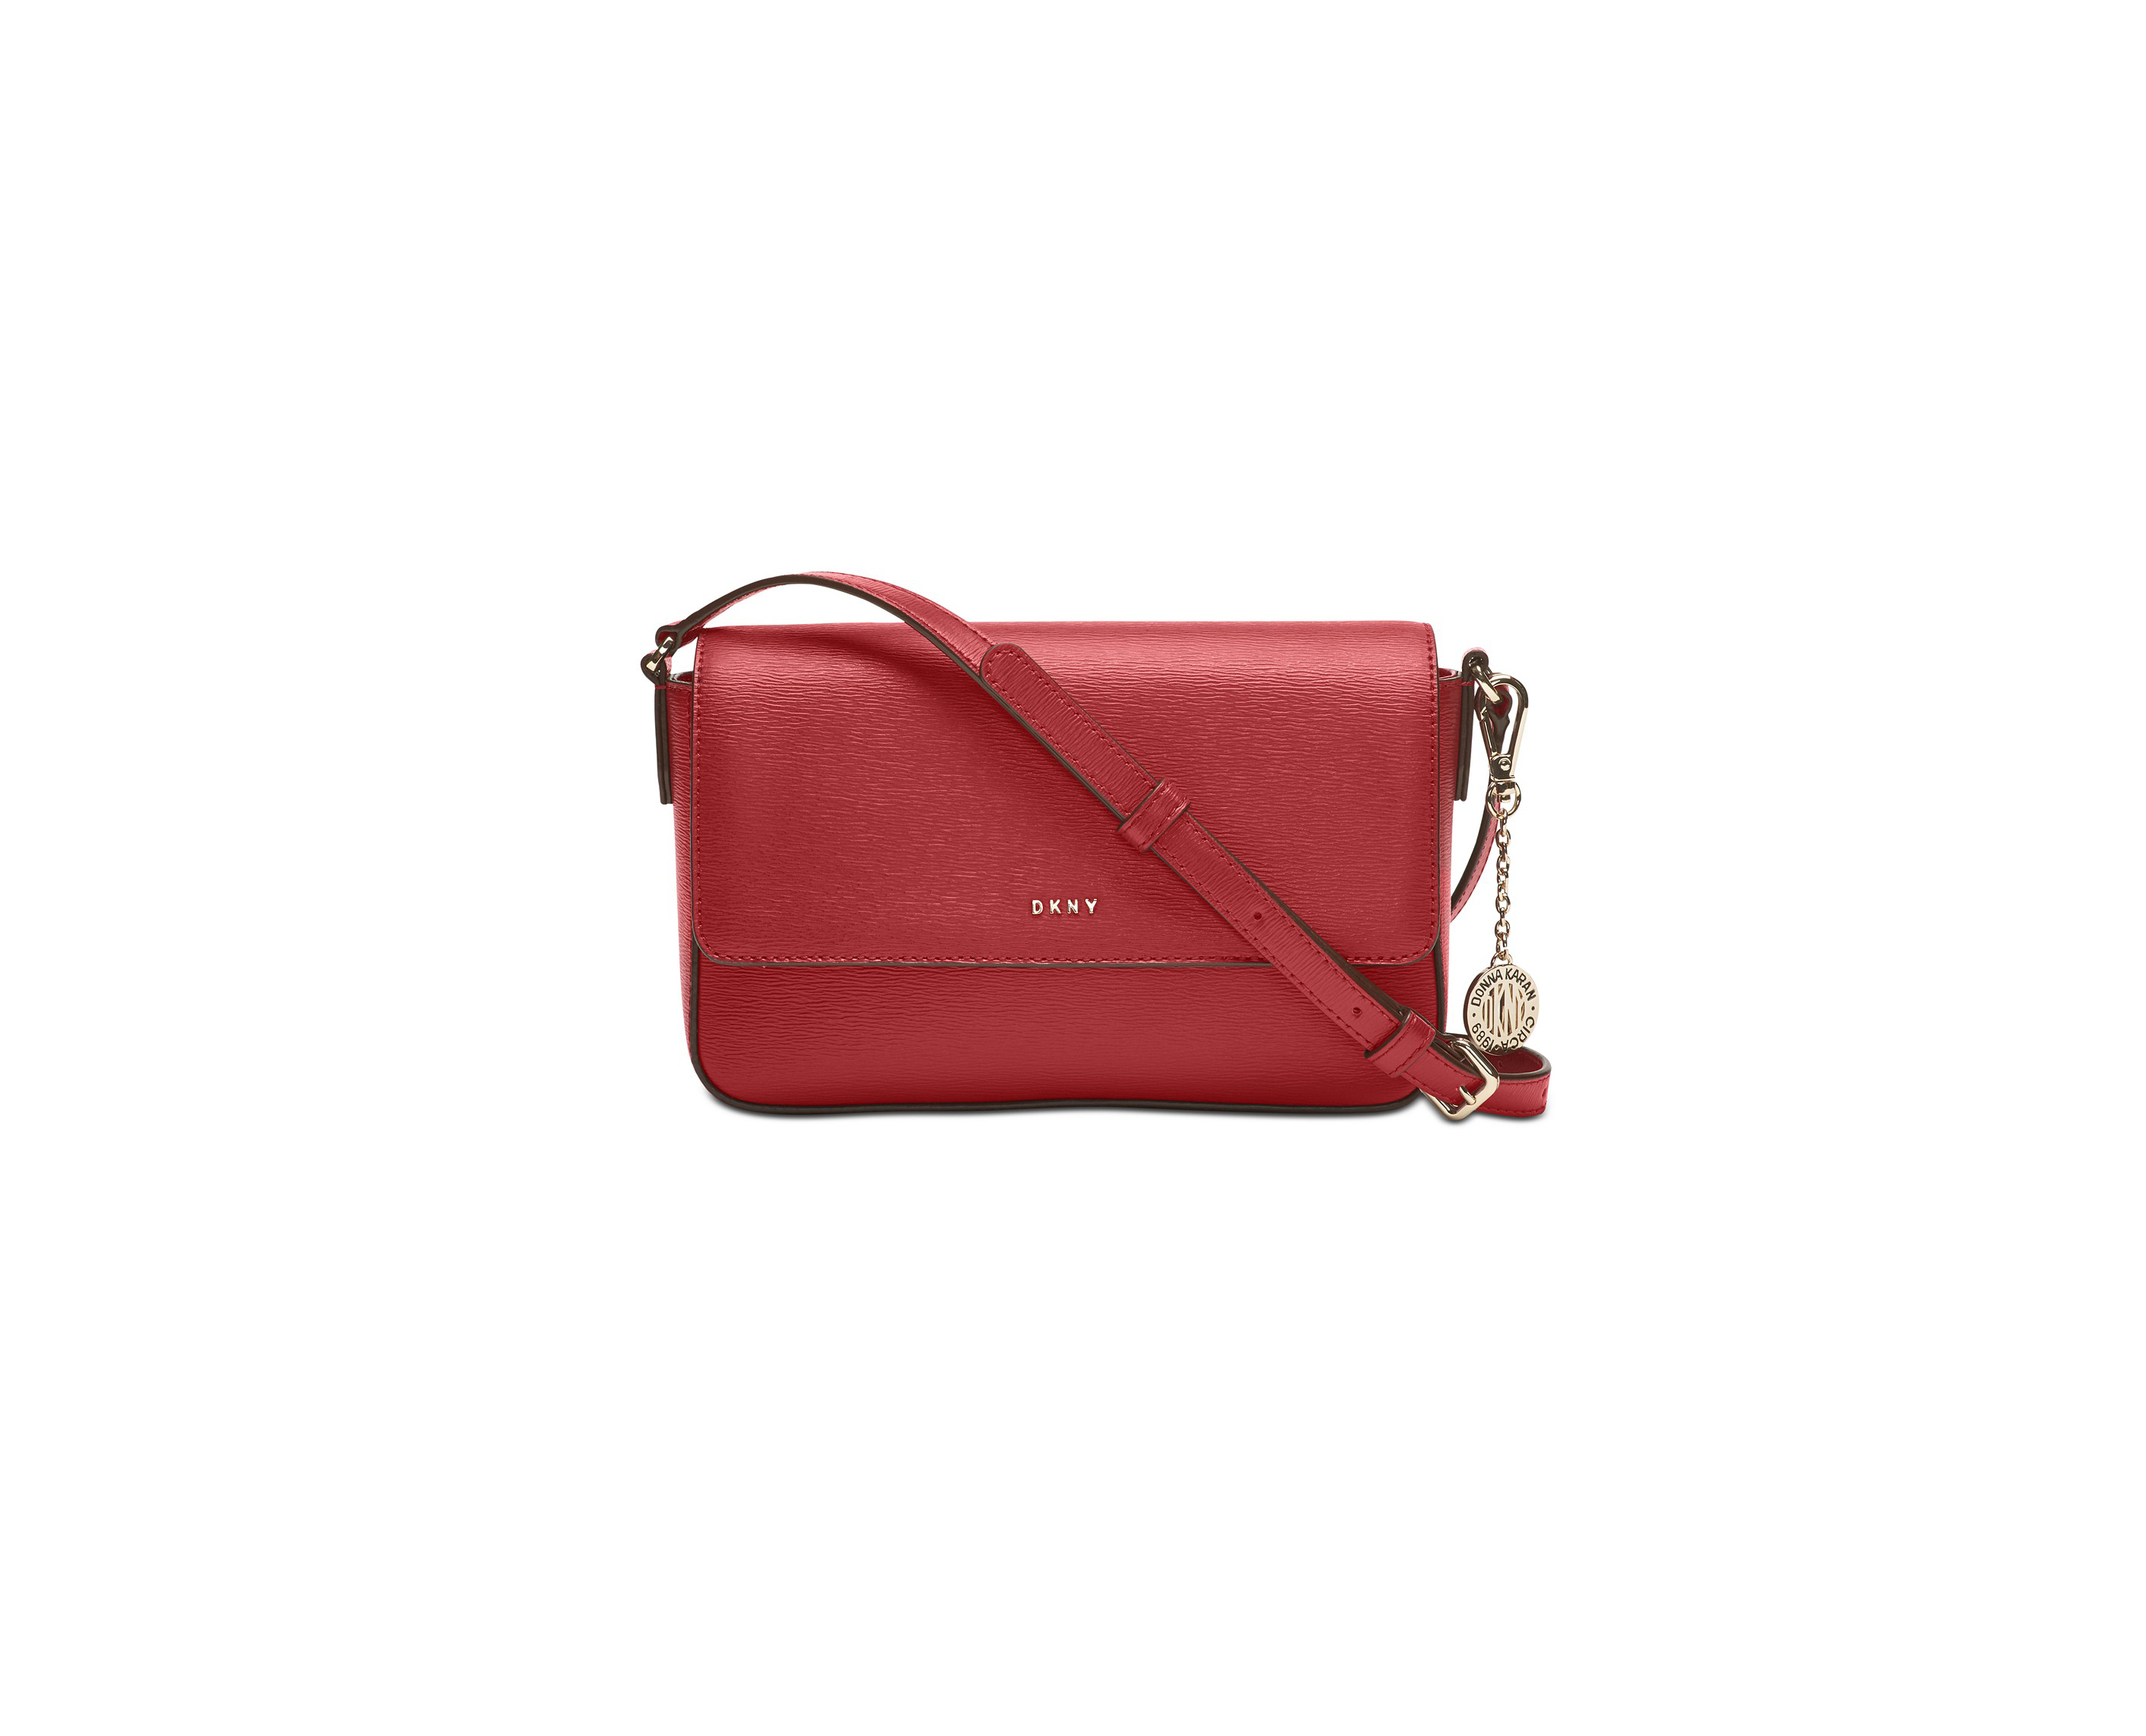 Dkny Leather Bags - Buy Dkny Leather Bags online in India